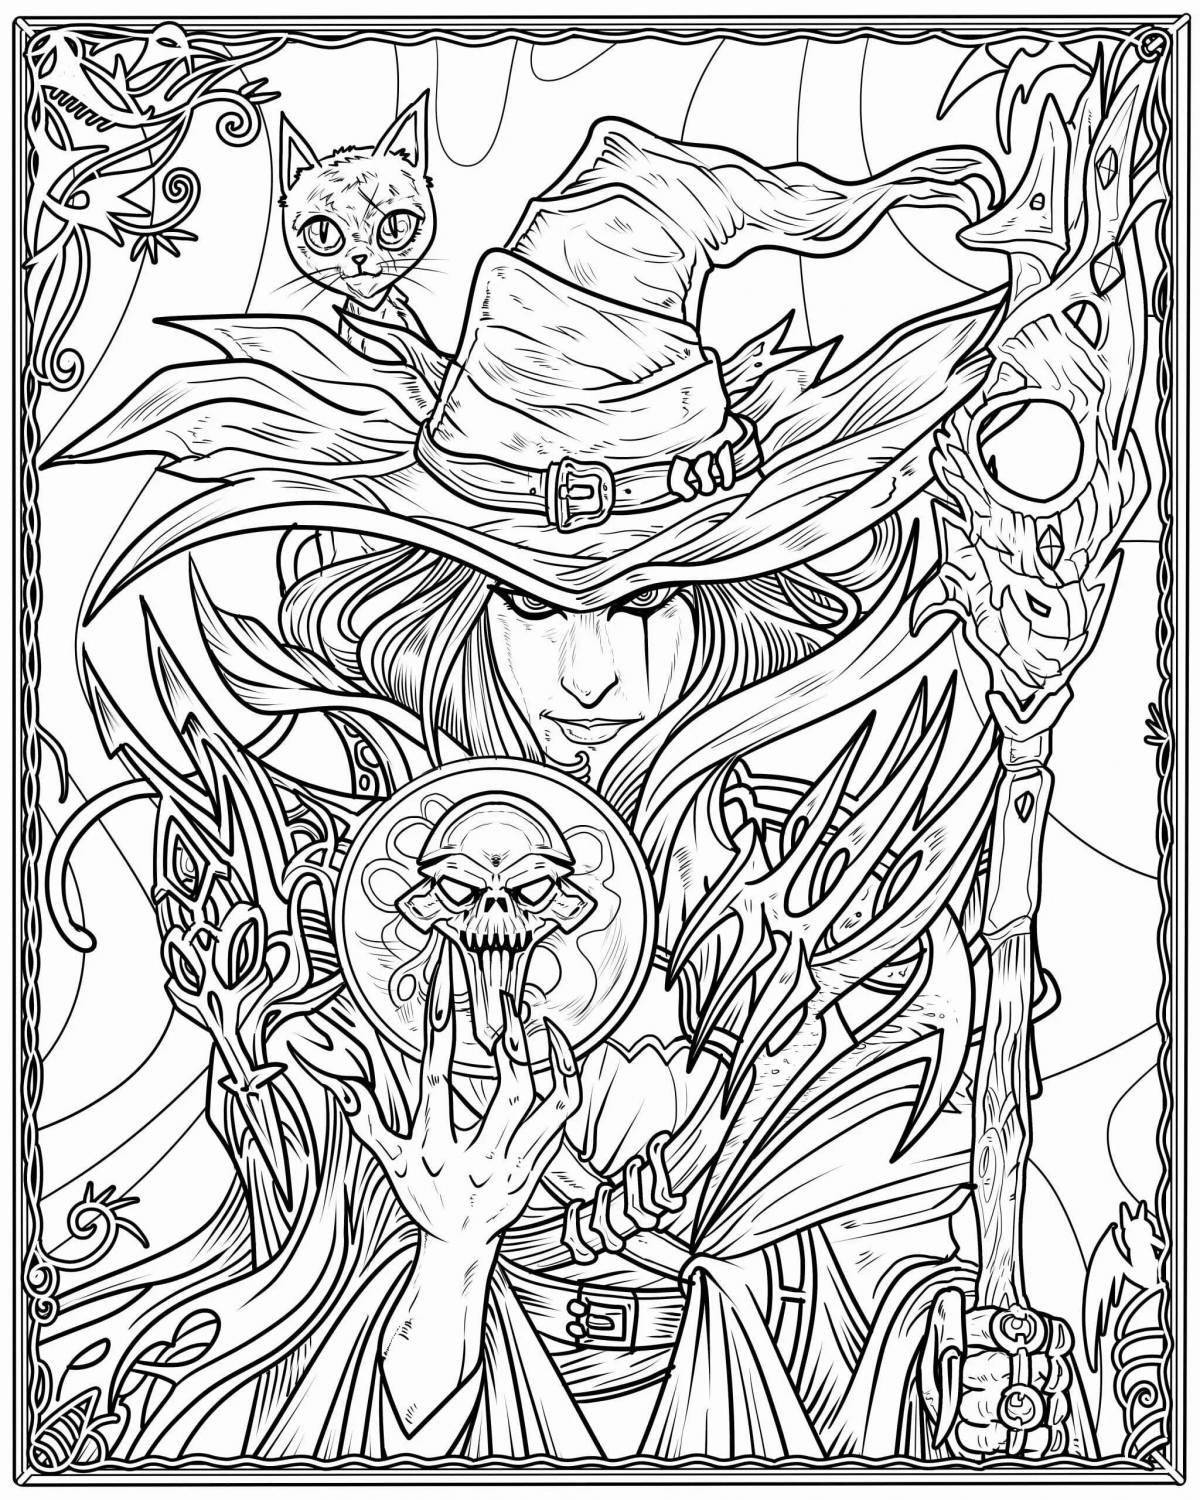 Magic page coloring page